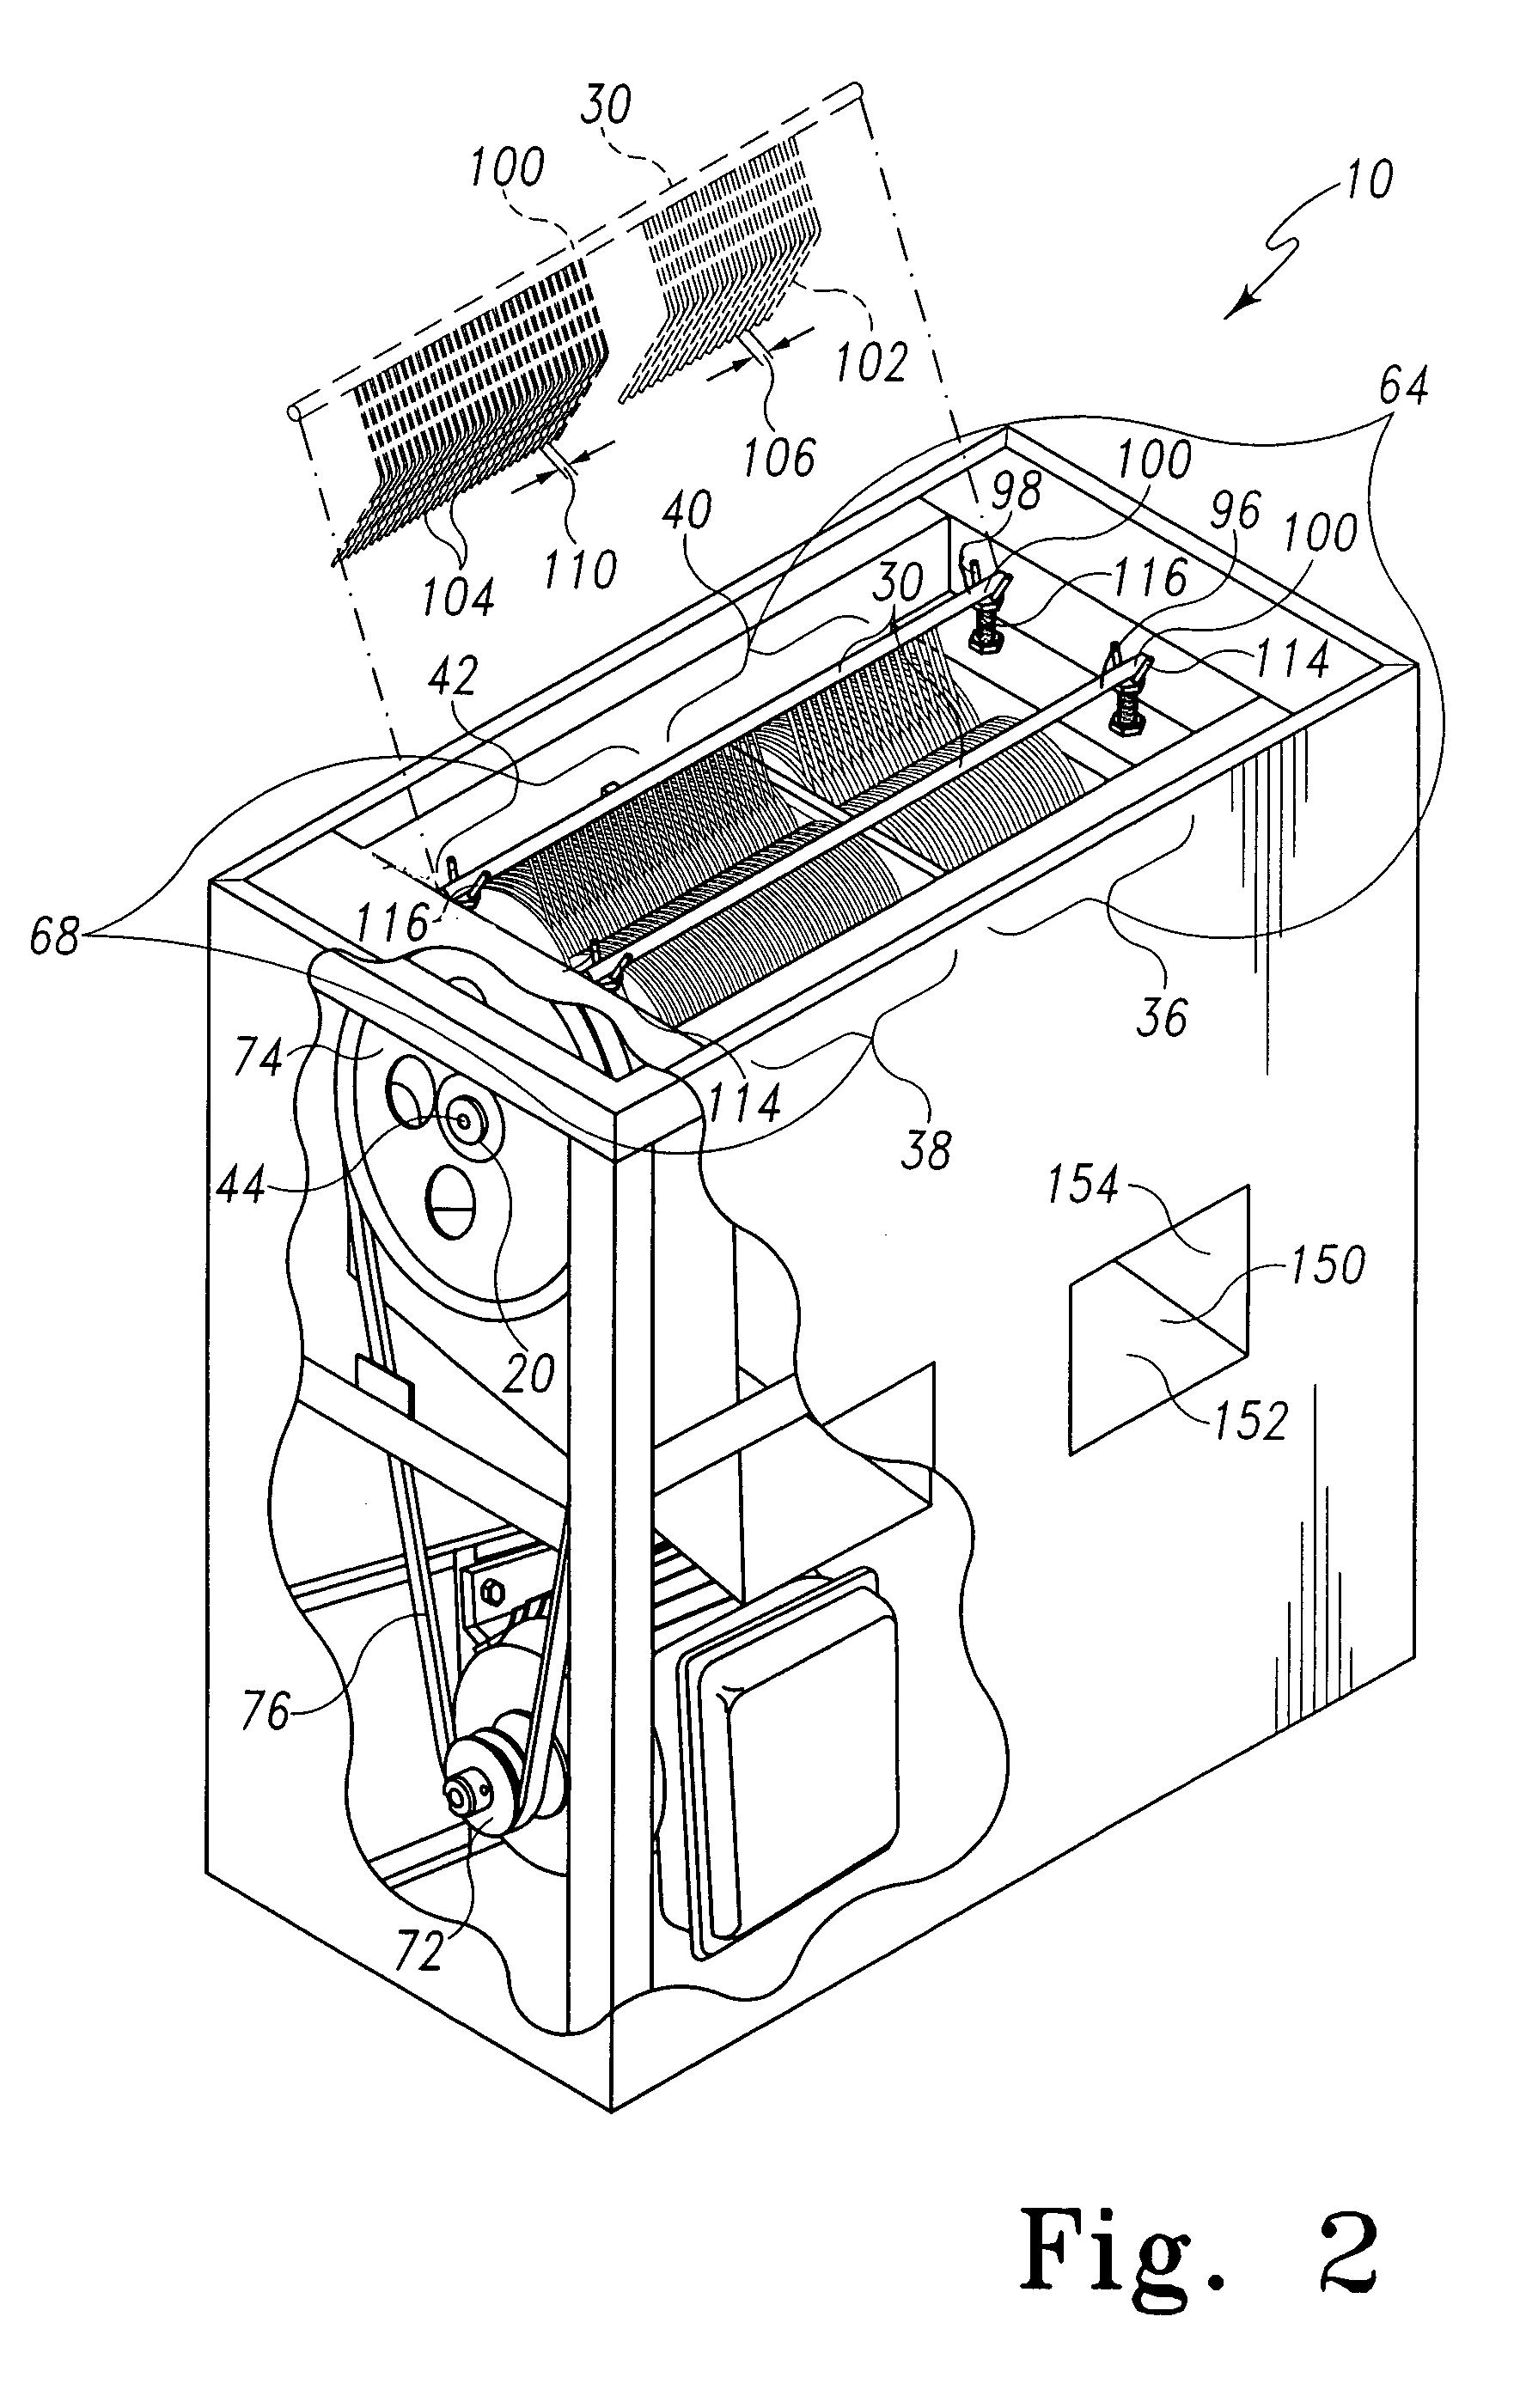 Food processing apparatus for forming strips, slices and cubes